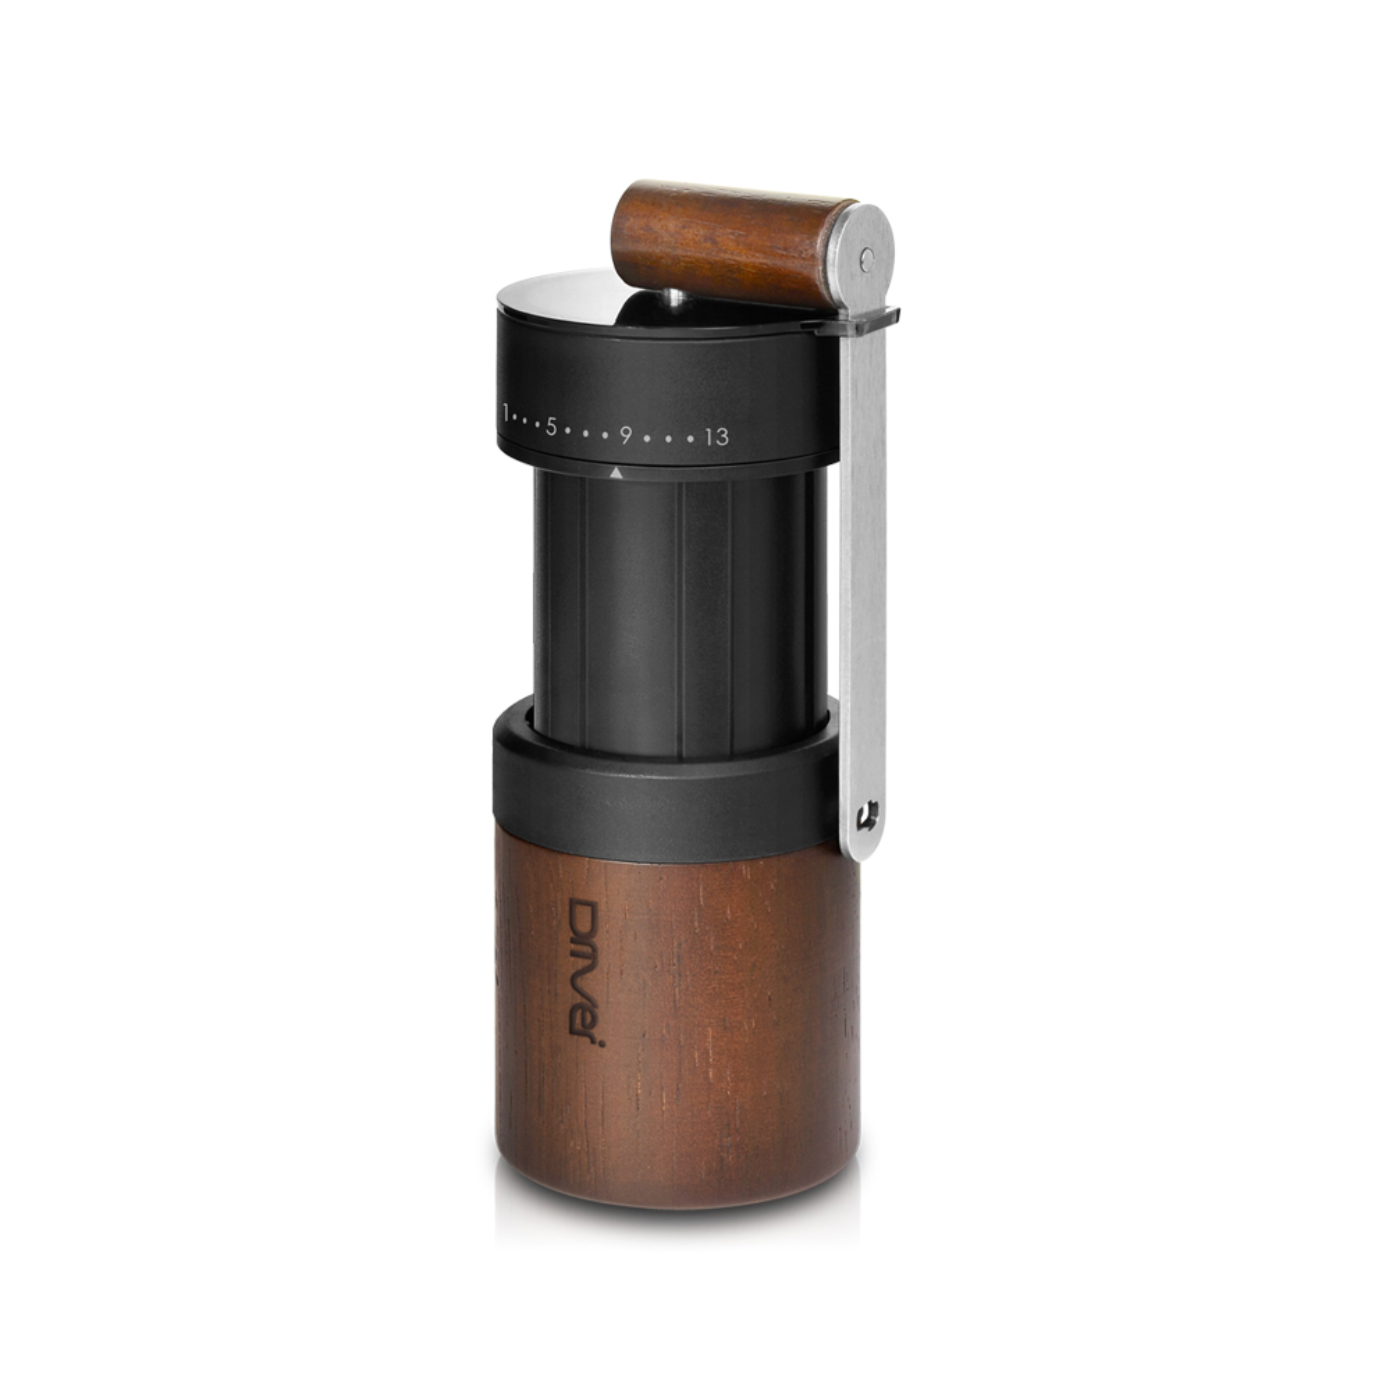 Driver Manual Coffee Grinder Dual Bearing Expandable Wooden Travel Friendly - PJT prime